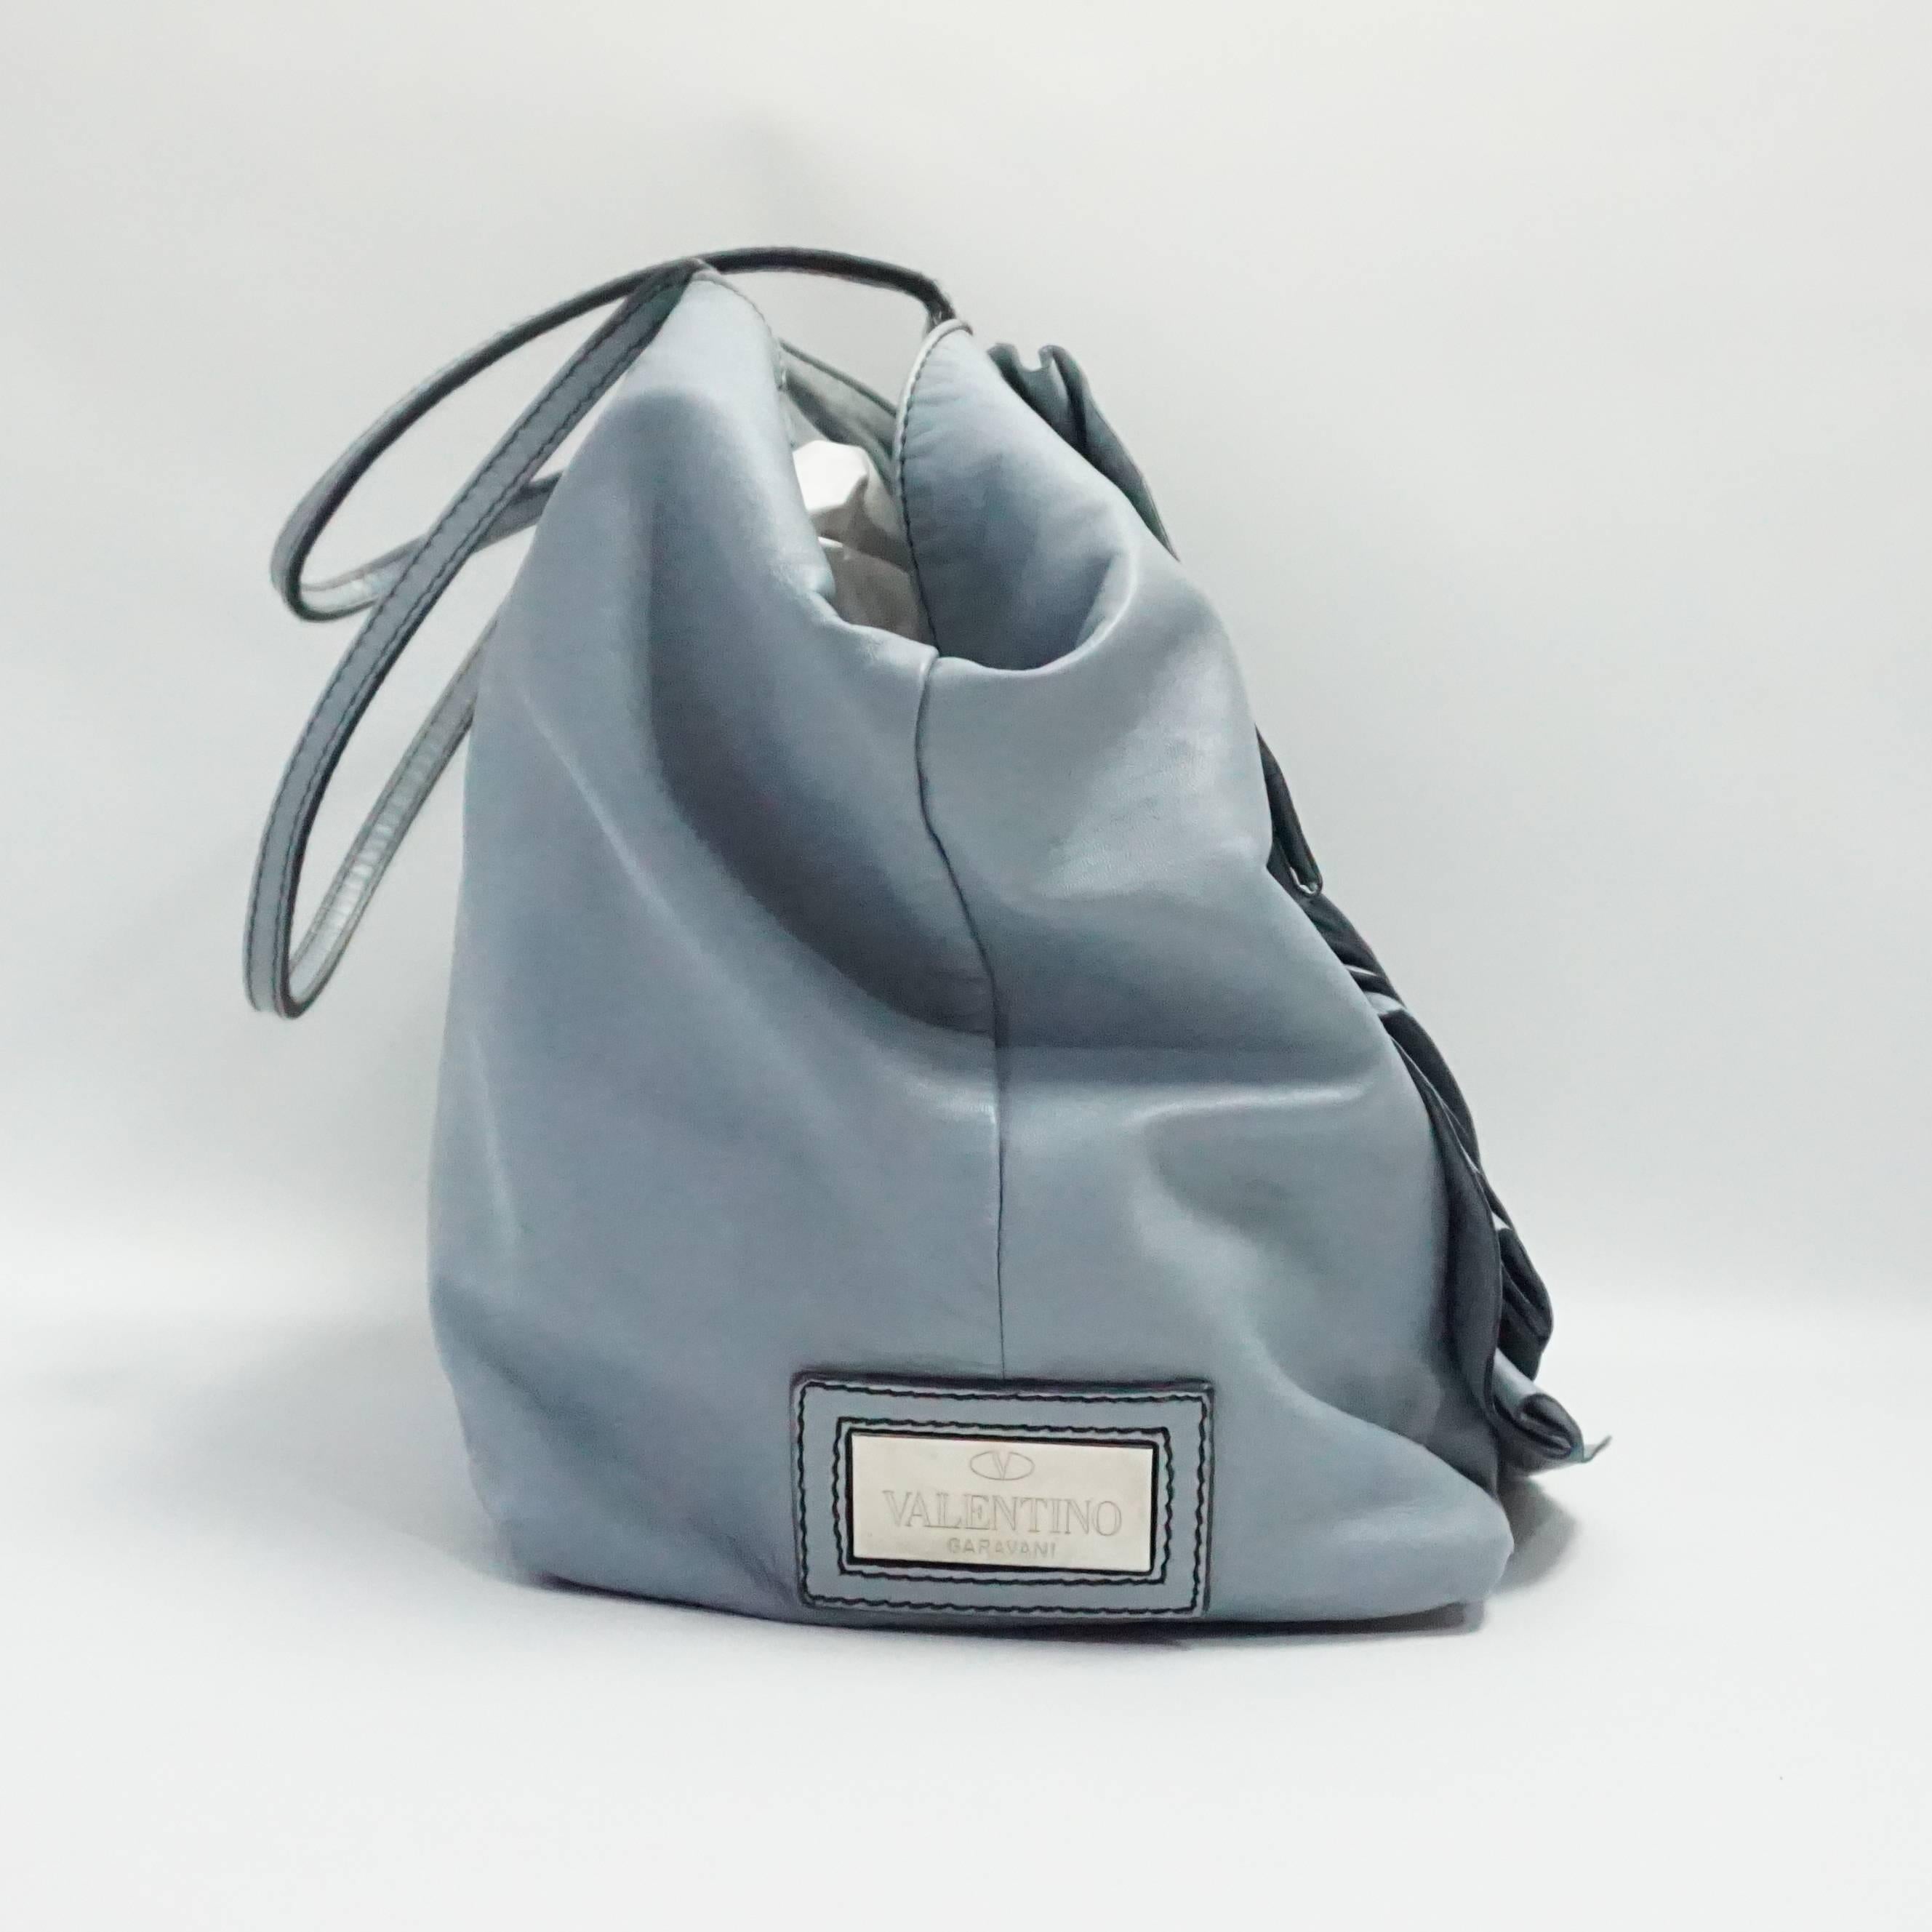 This Valentino Petale Rose tote is pale blue leather. It is large and has two straps along with a detachable shoulder strap. This tote is in very good condition with some staining inside and outside. This tote retails for